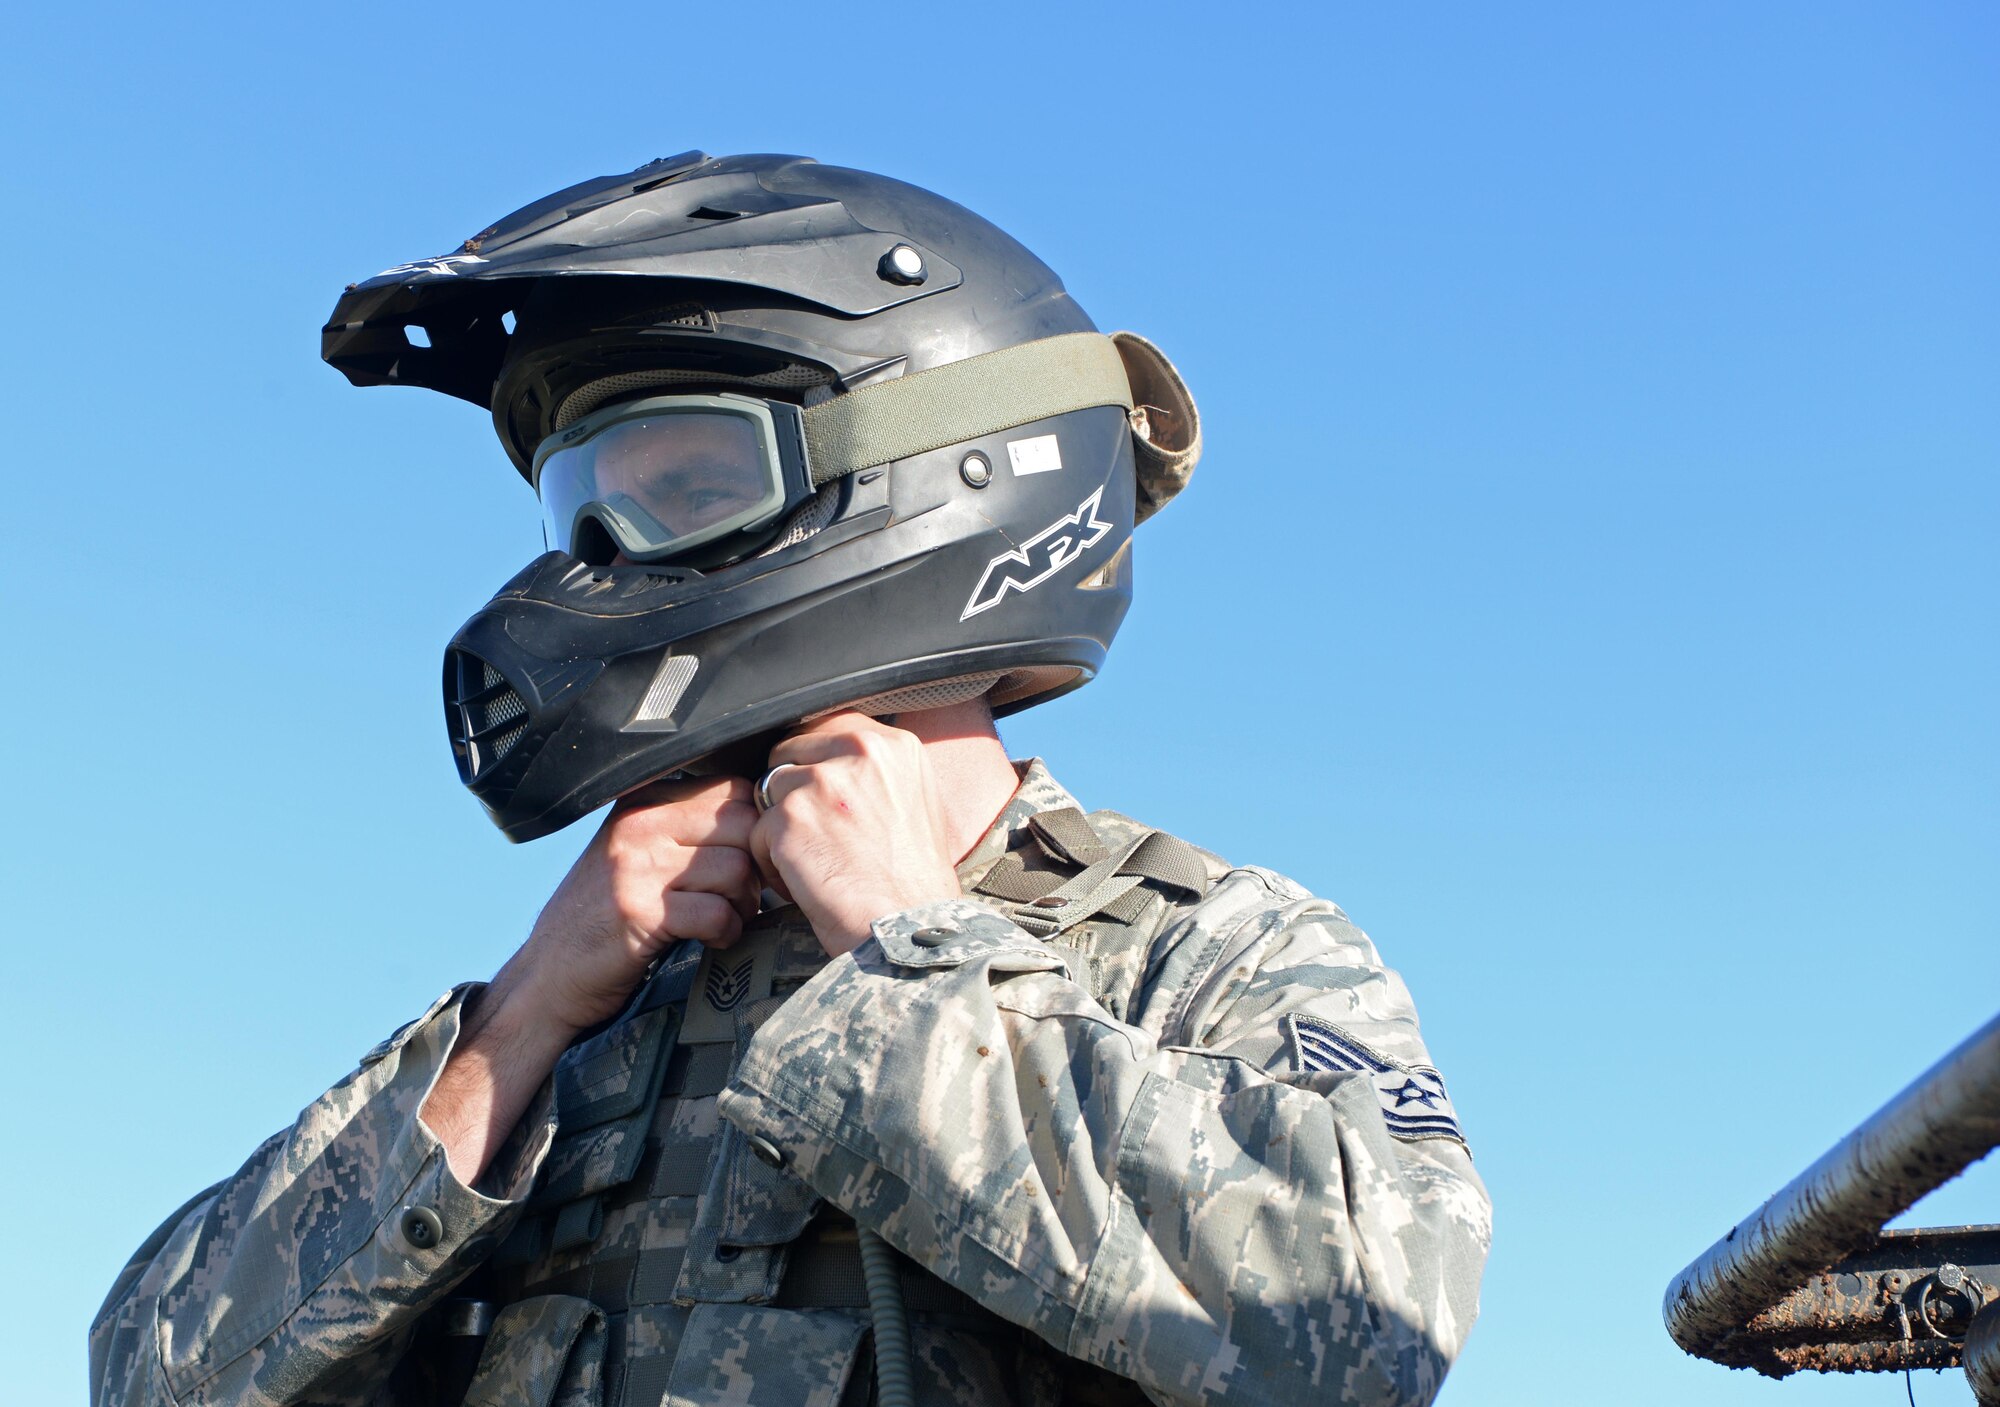 Tech. Sgt. Jeremy Delvaux, 9th Security Forces Squadron flight chief, dons a helmet for a coyote patrol Nov. 4, 2016, at Beale Air Force Base, California. Security forces’ personnel wear safety equipment and receive training to ensure their safety on patrols. (U.S. Air Force photo/Airman Tristan D. Viglianco)